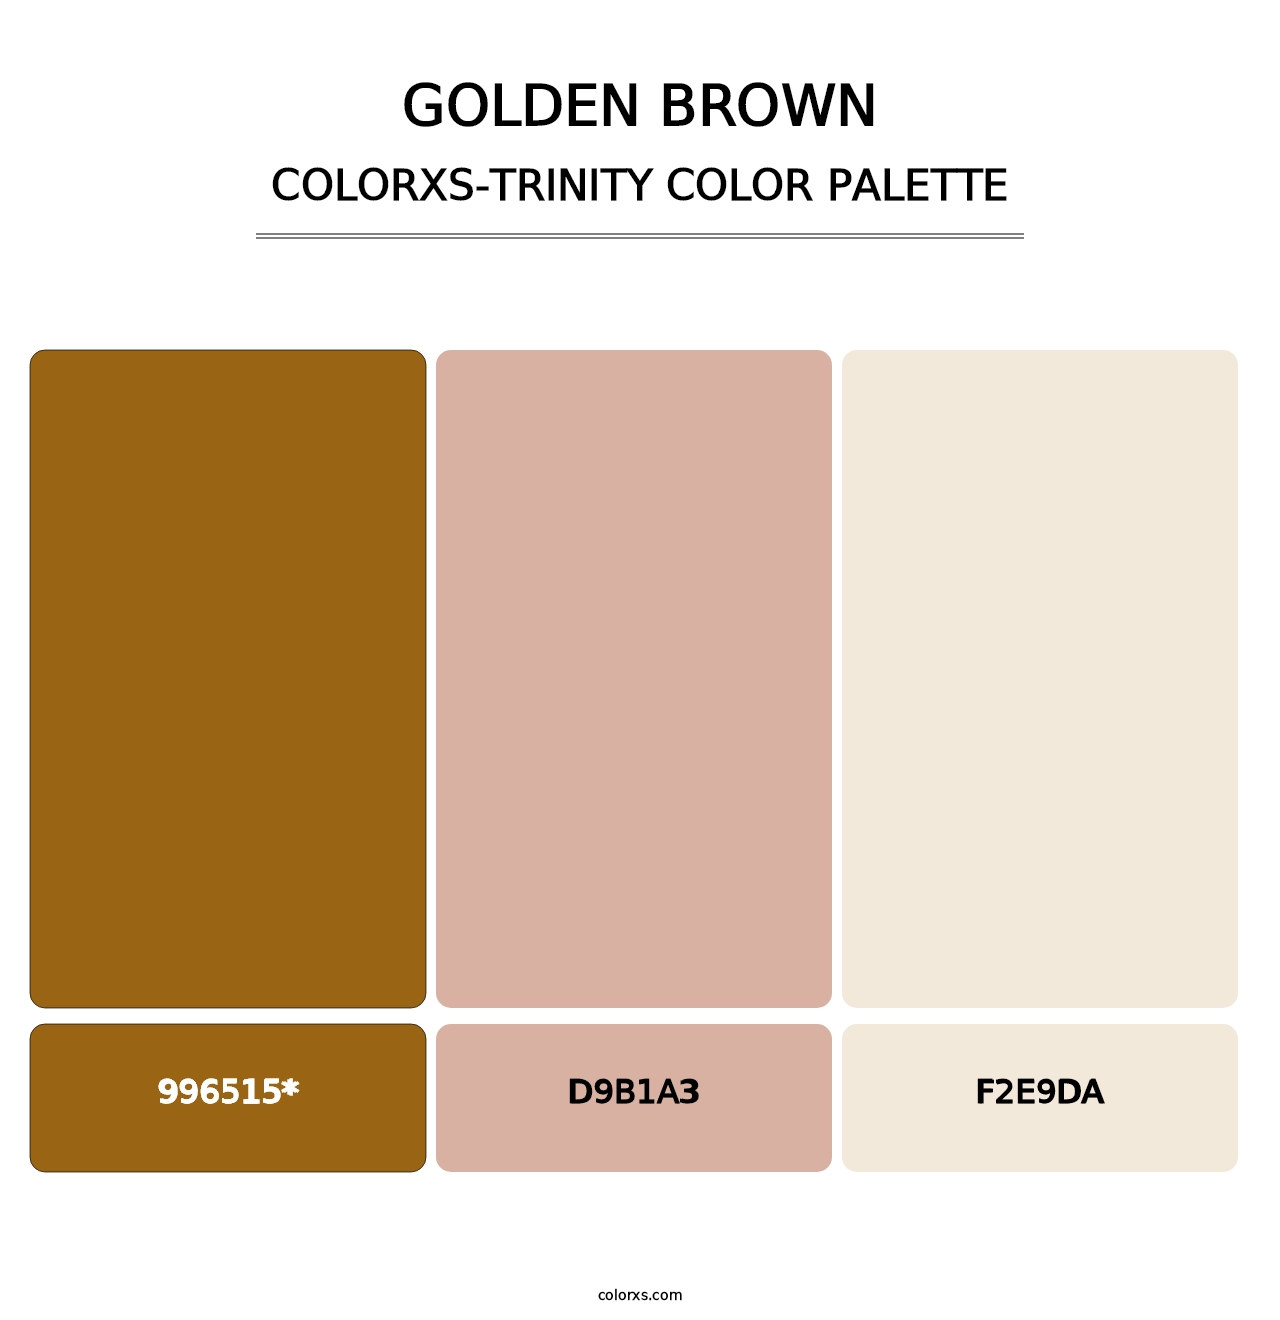 Golden brown - Colorxs Trinity Palette